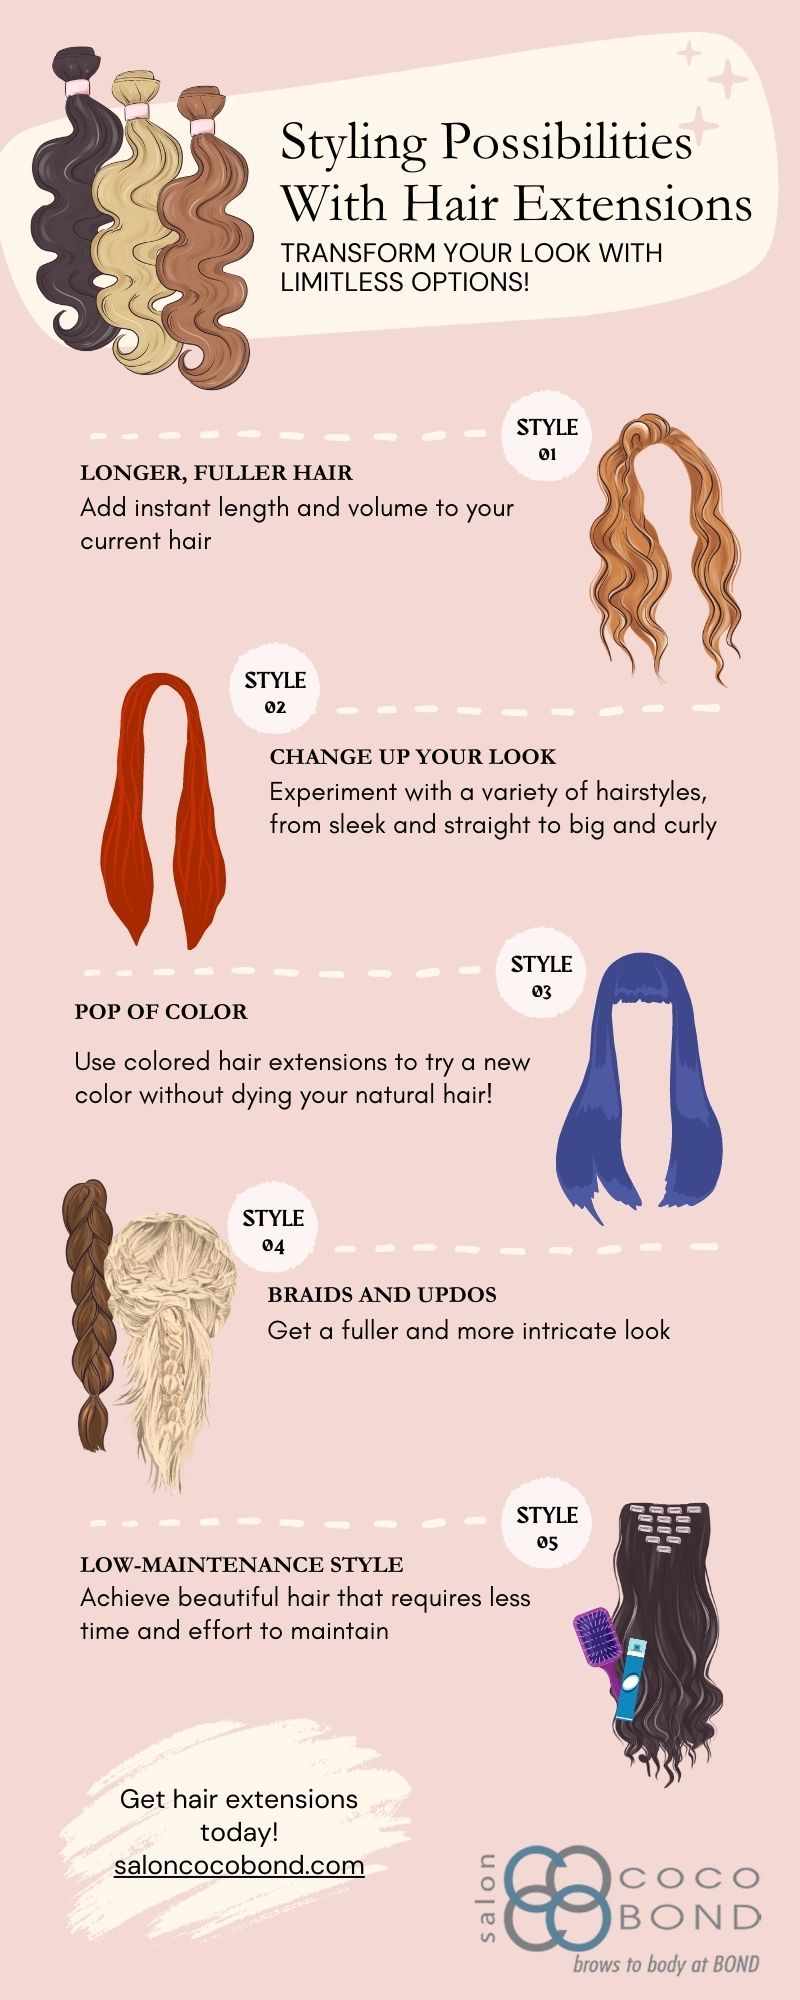 M35192 - Infographic - Styling Possibilities With Hair Extensions (1).jpg